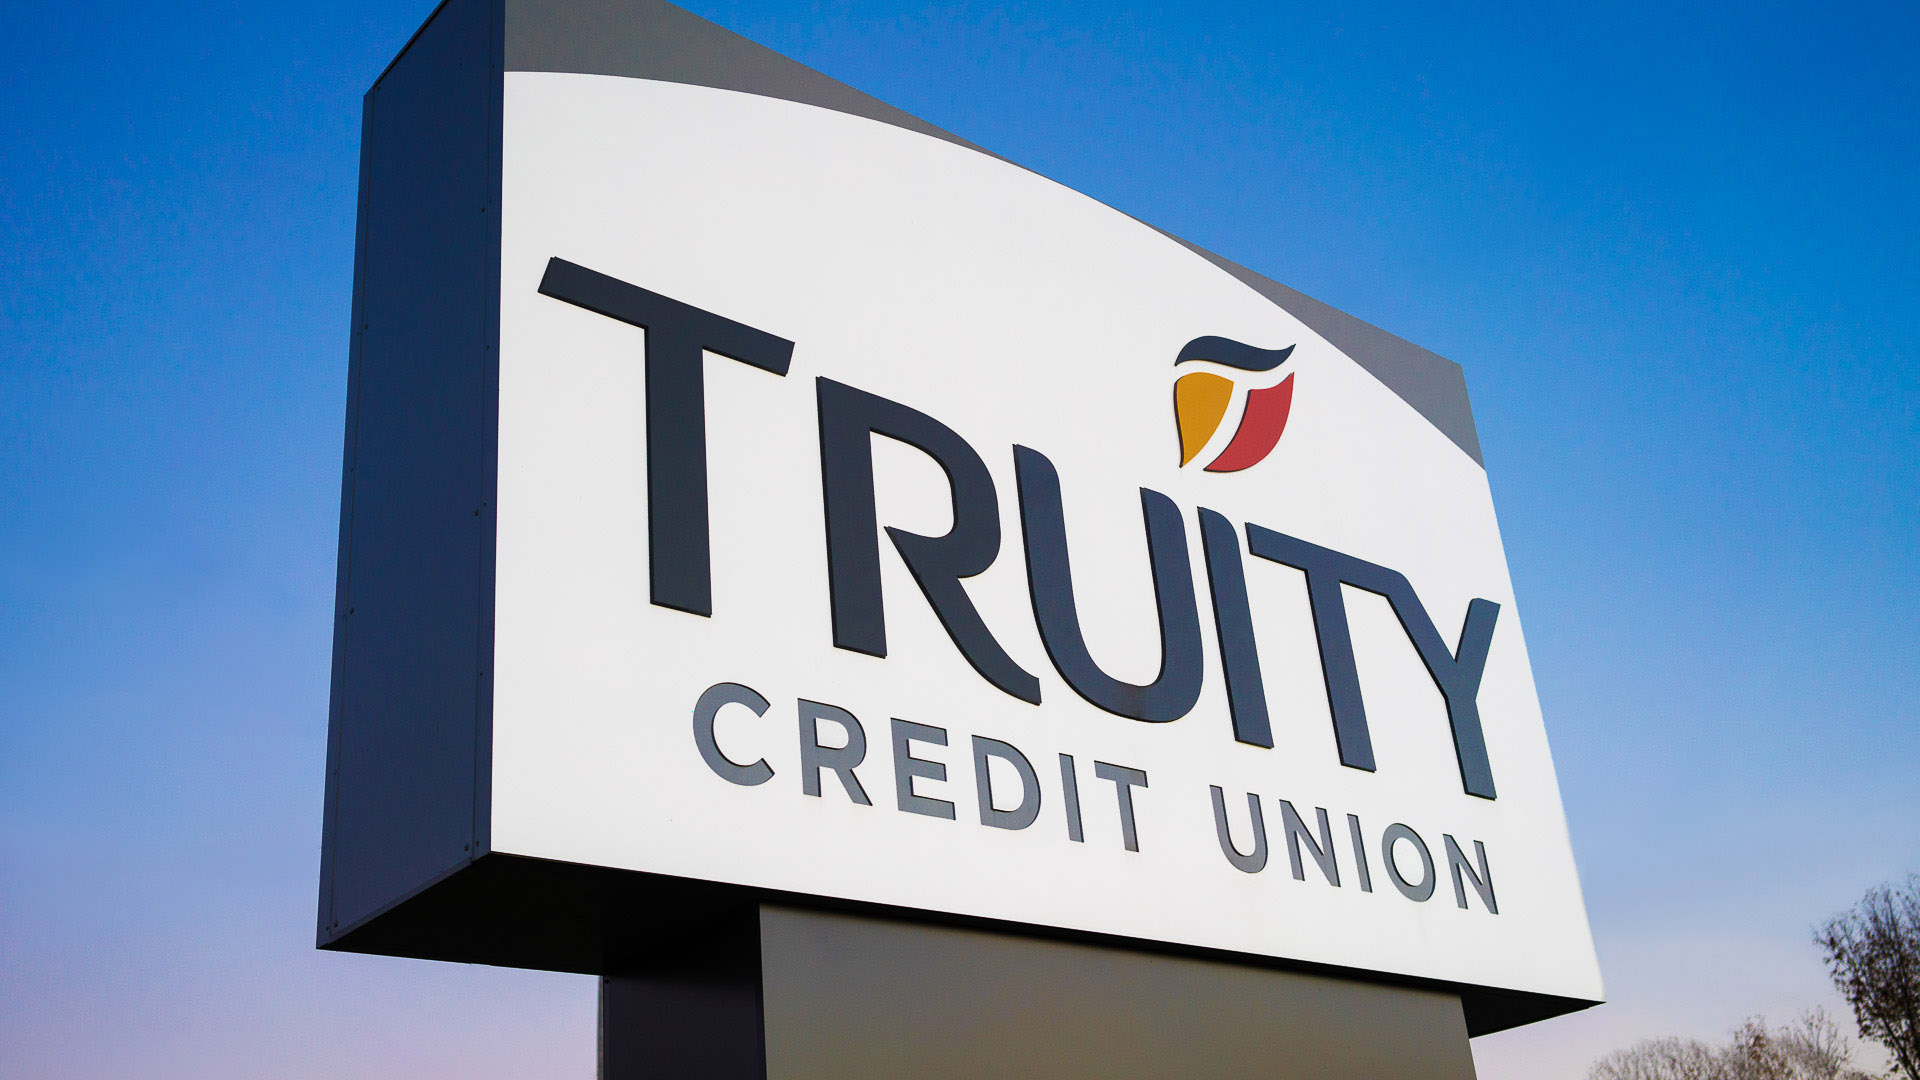 Truity Credit Union | Grilled Cheese Bacon Squares | Bacon Grilled